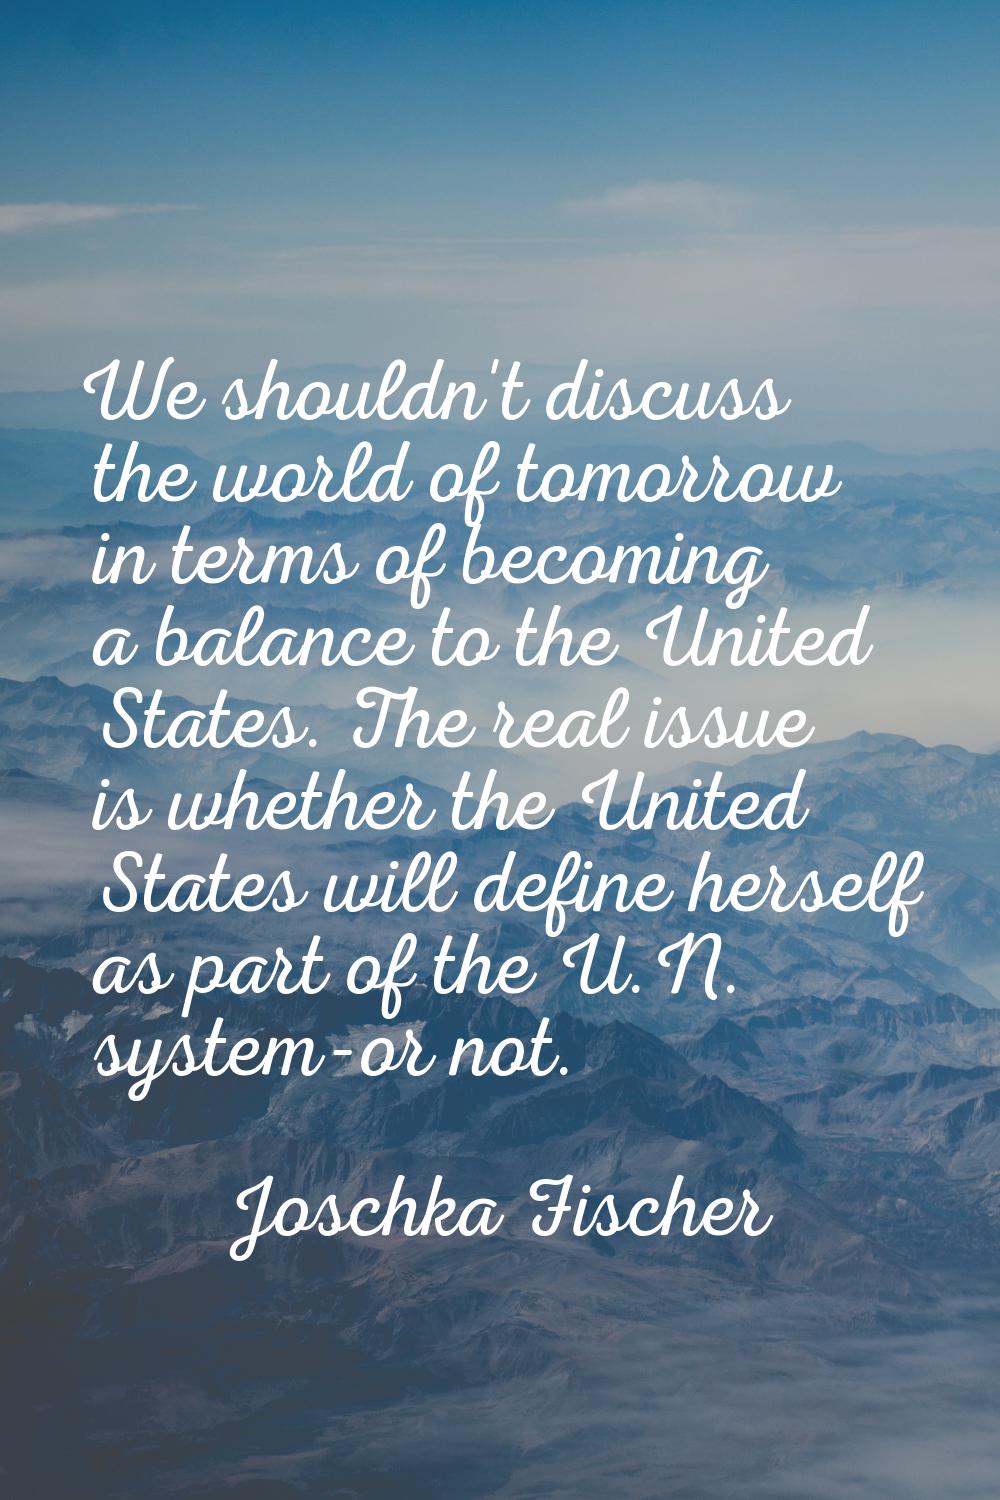 We shouldn't discuss the world of tomorrow in terms of becoming a balance to the United States. The